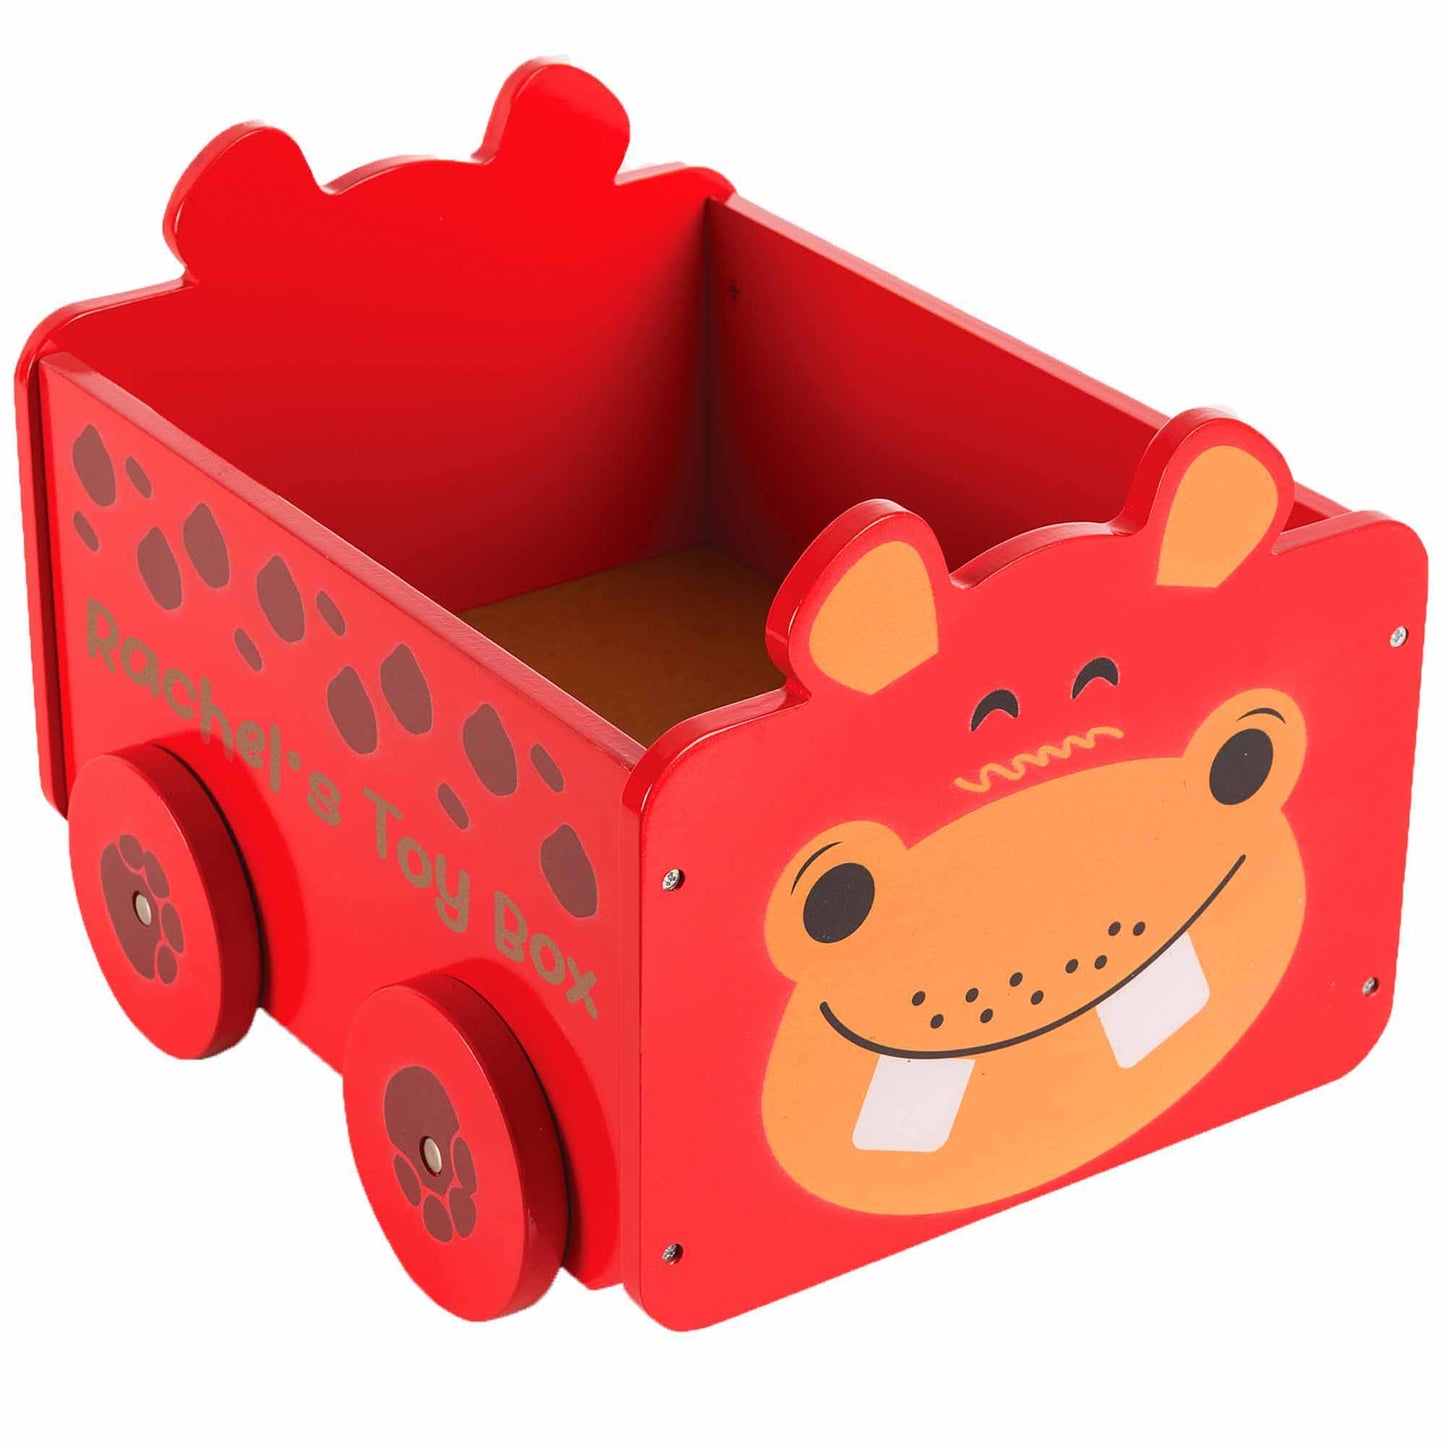 Personalised Toy Box Engraved with Name  - Always Looking Good - Hippo  